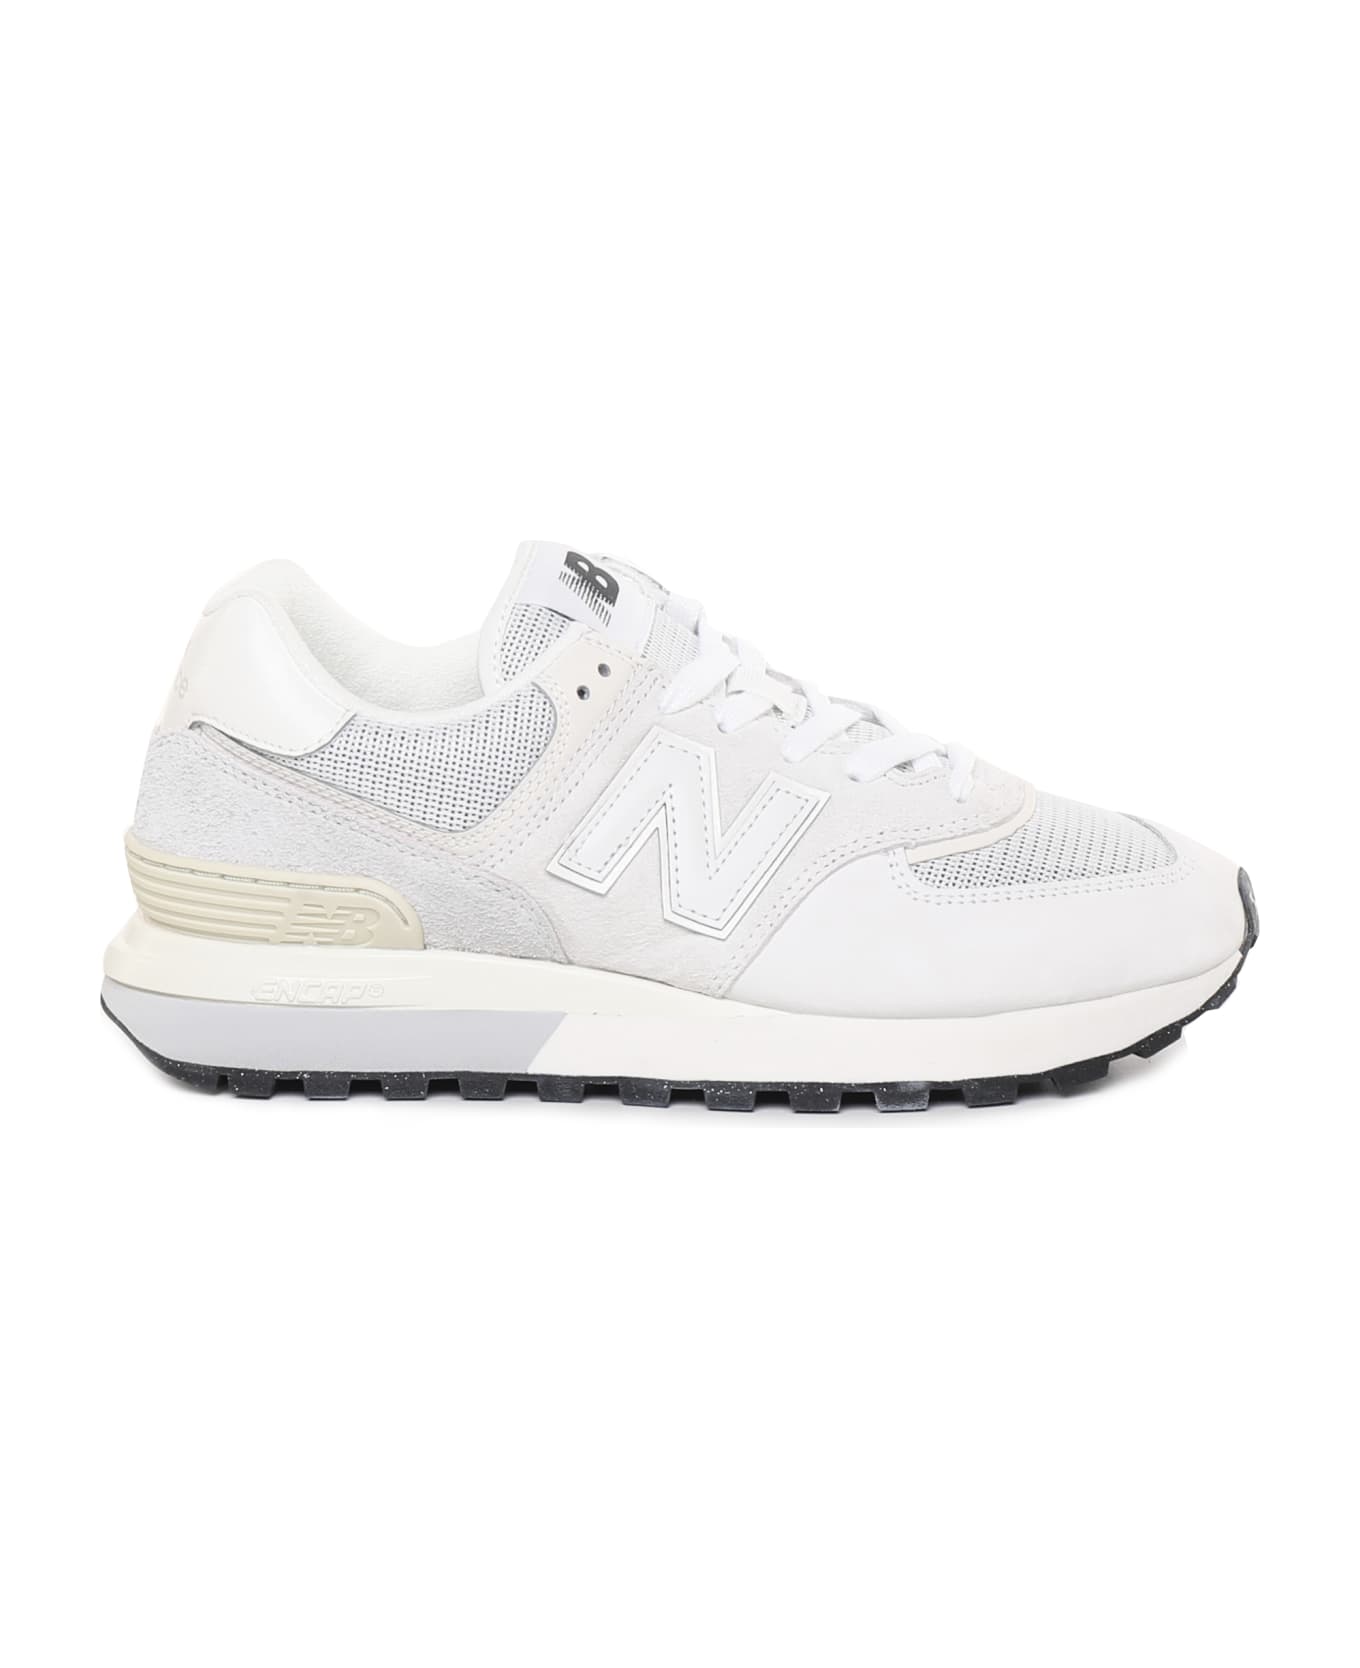 New Balance 574 Sneakers - Reflection スニーカー